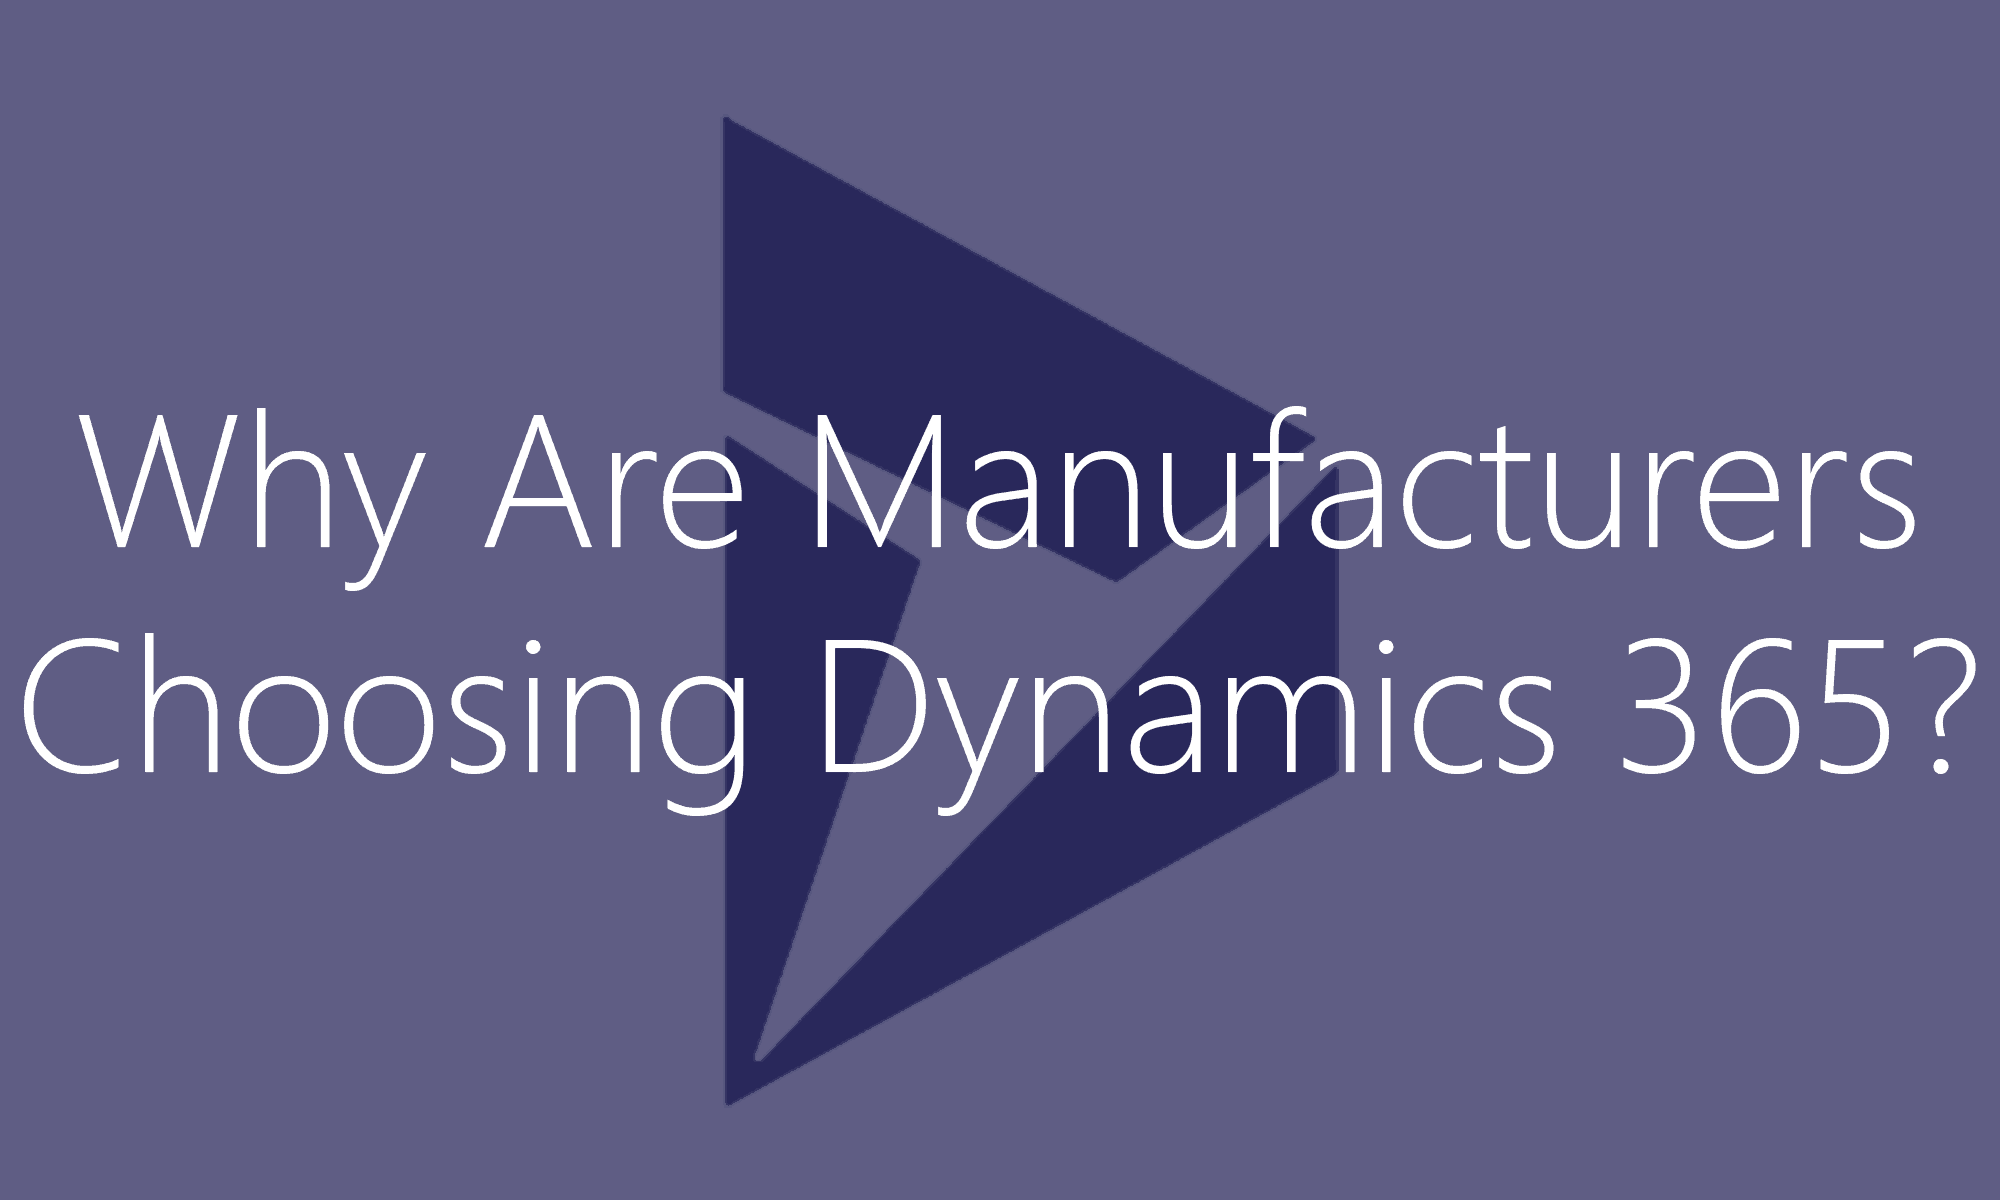 Dynamics 365 for Manufacturing